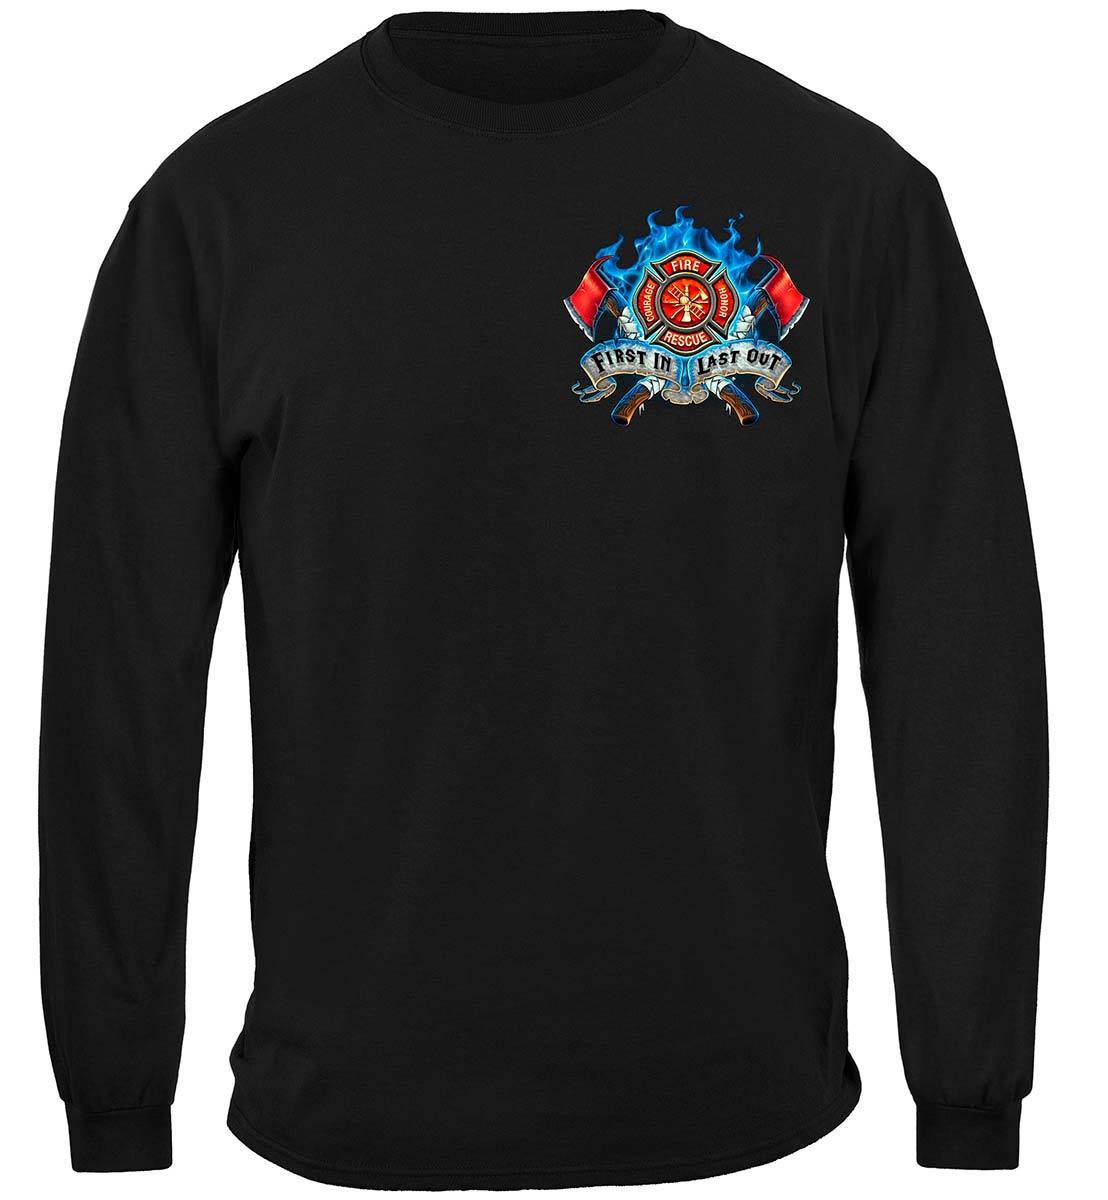 Firefighter Fire Dog First in Last Out Premium Long Sleeves